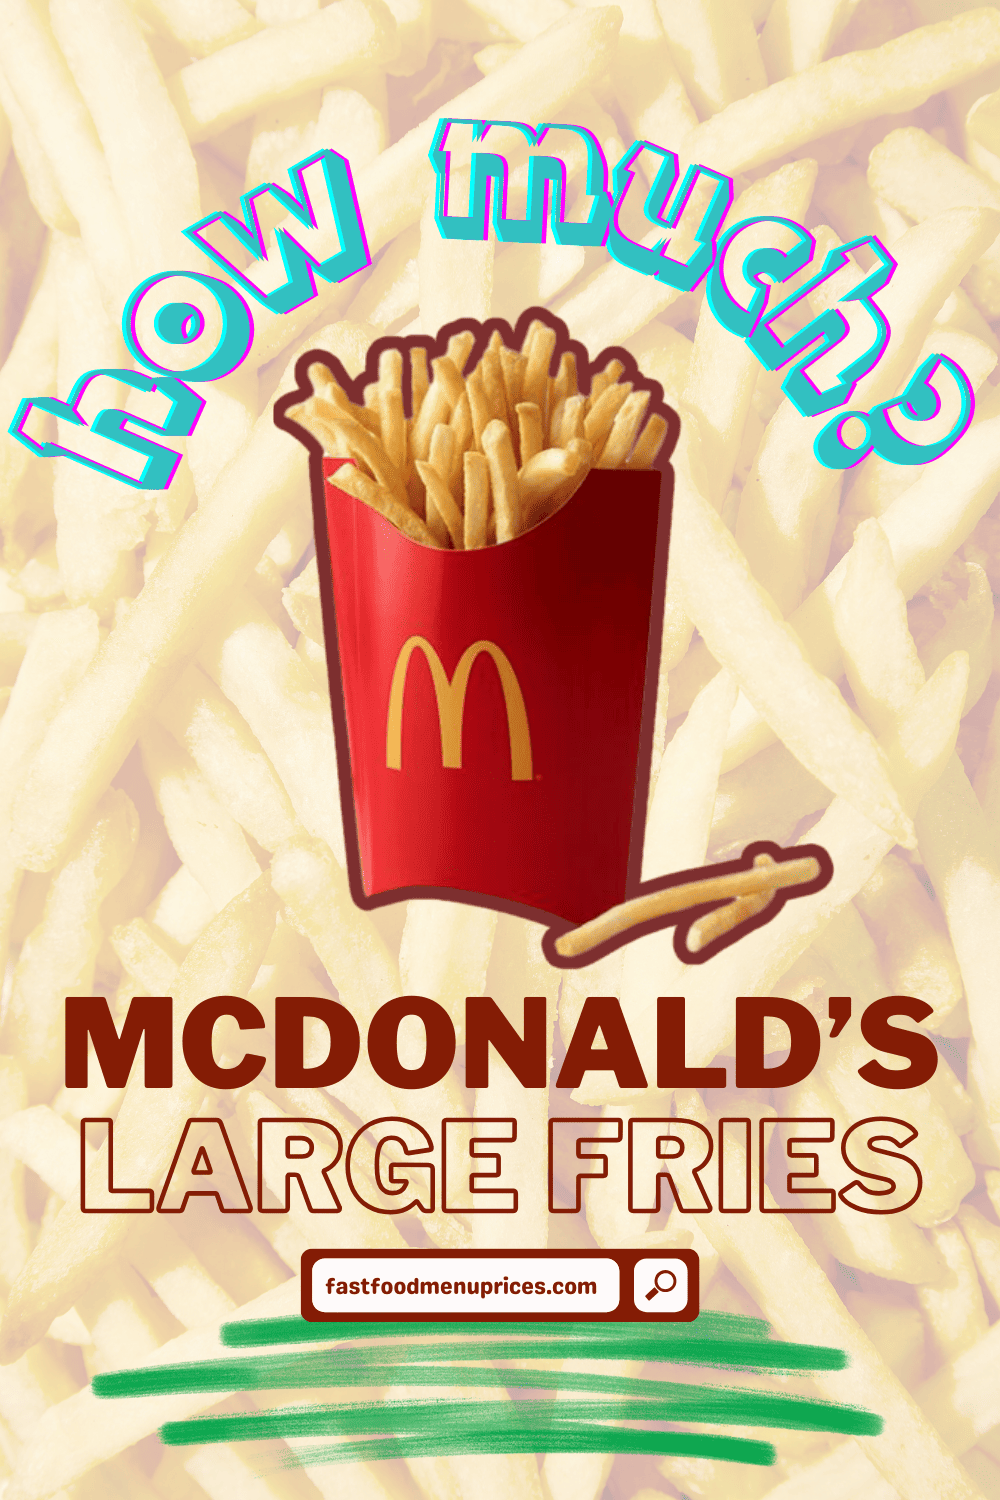 Wondering about the cost of McDonald's large fries?